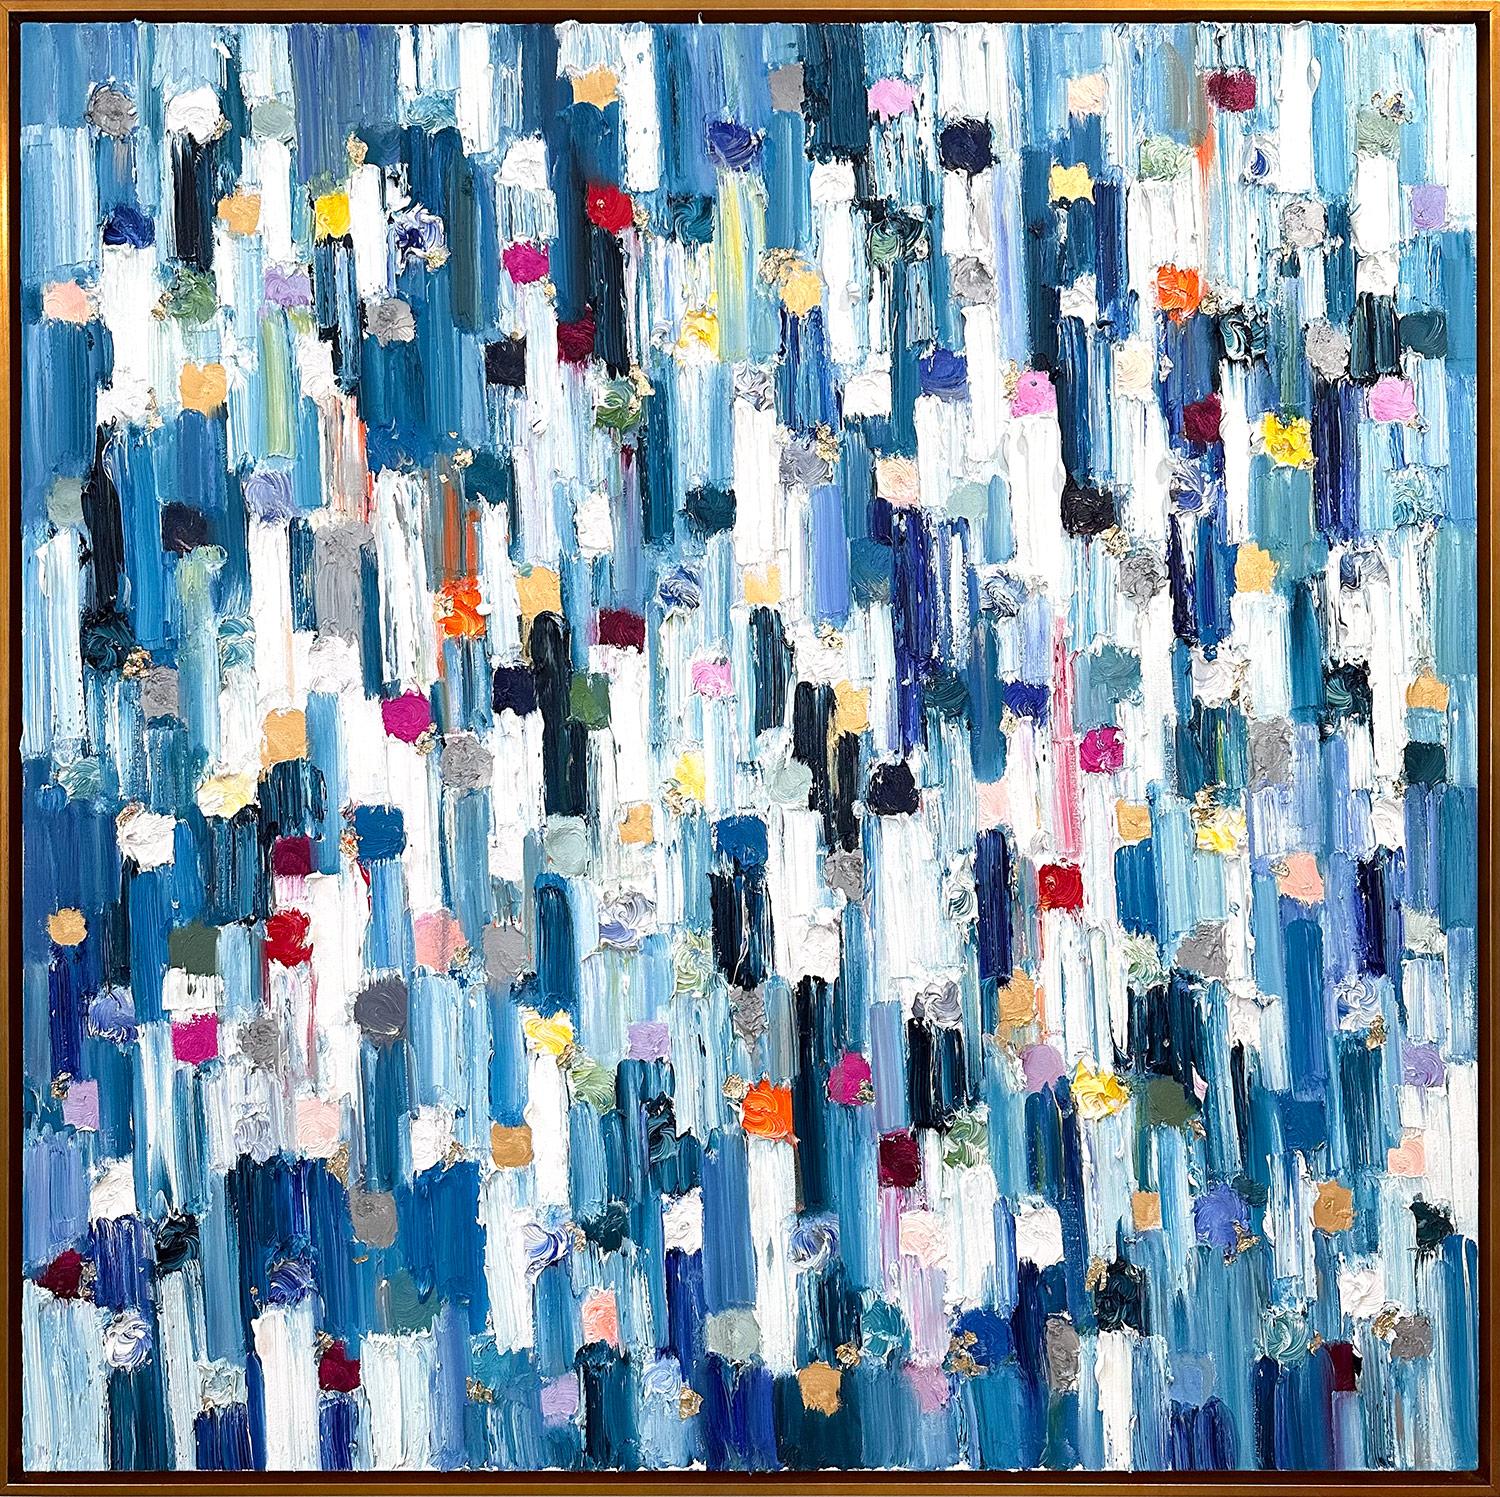 Cindy Shaoul Abstract Painting – "Dripping Dots - Malediven" Multicolor Contemporary Ölgemälde auf Leinwand gerahmt